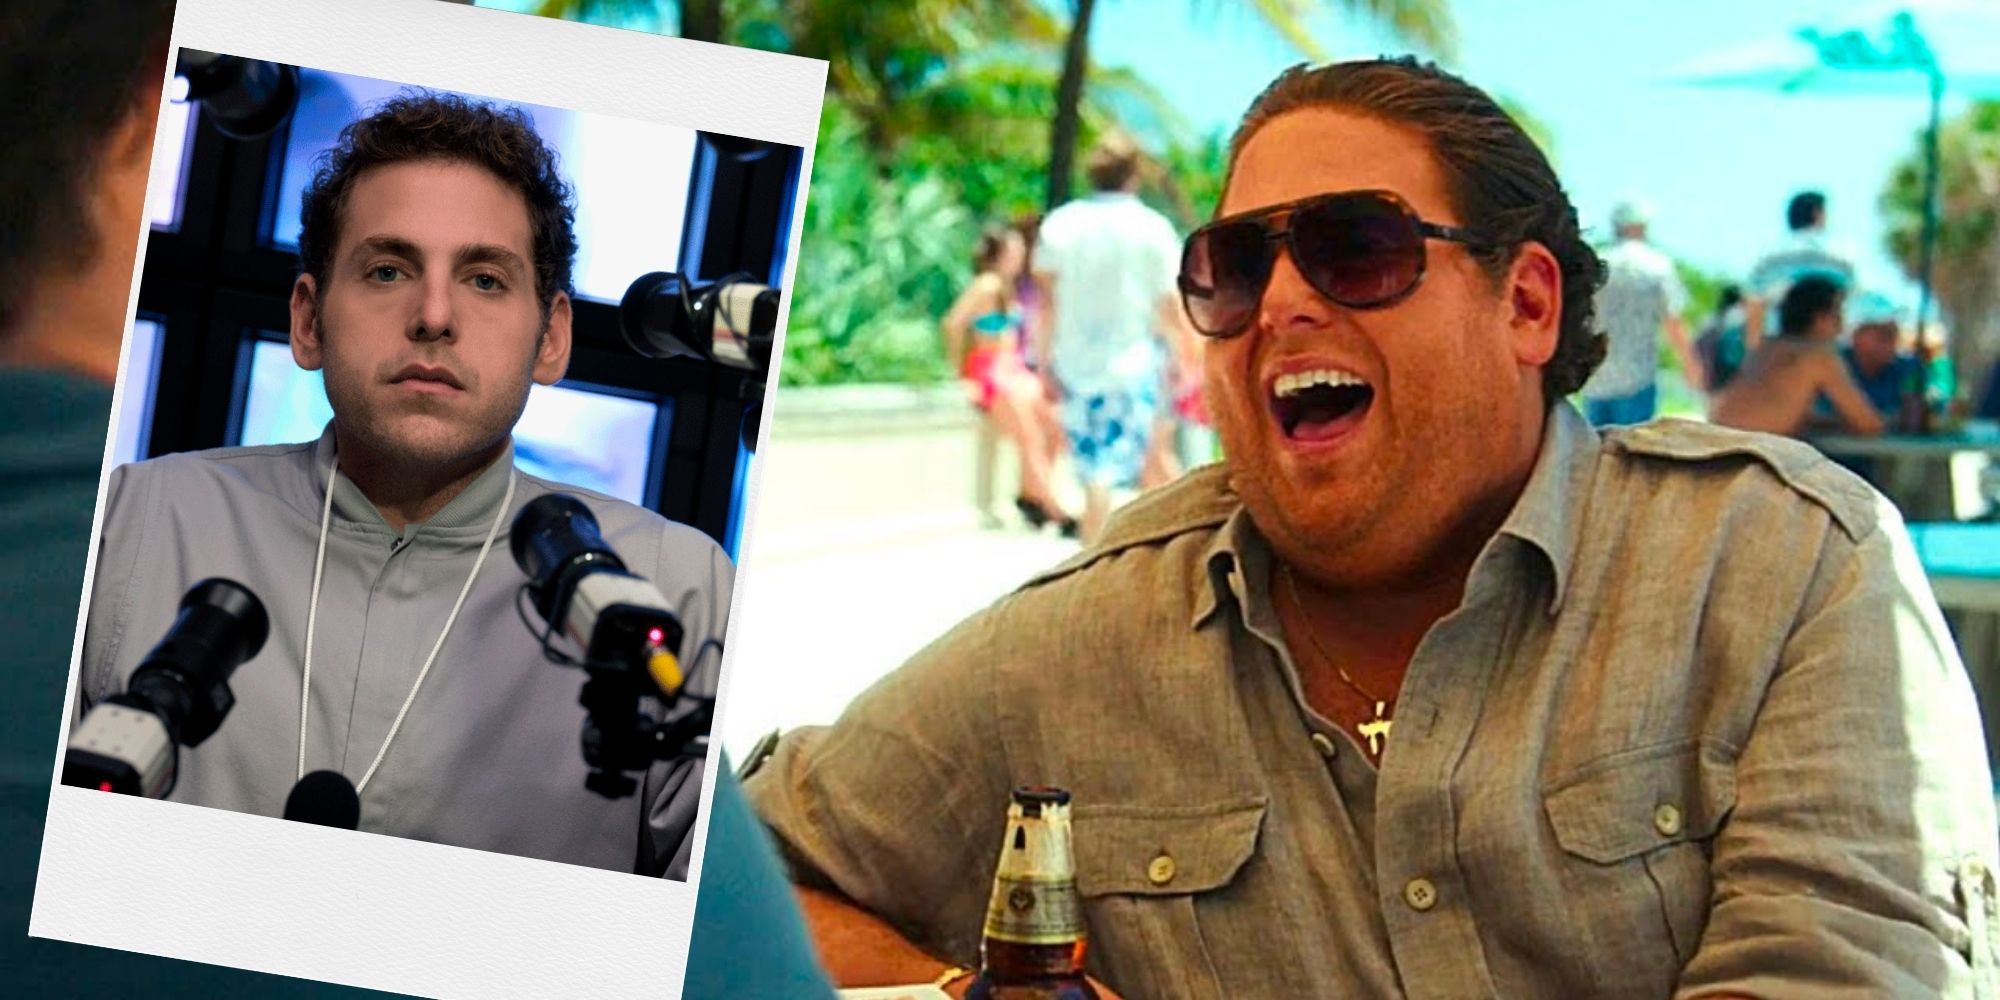 Jonah Hill in Netflix TV Show Maniac and War Dogs movie